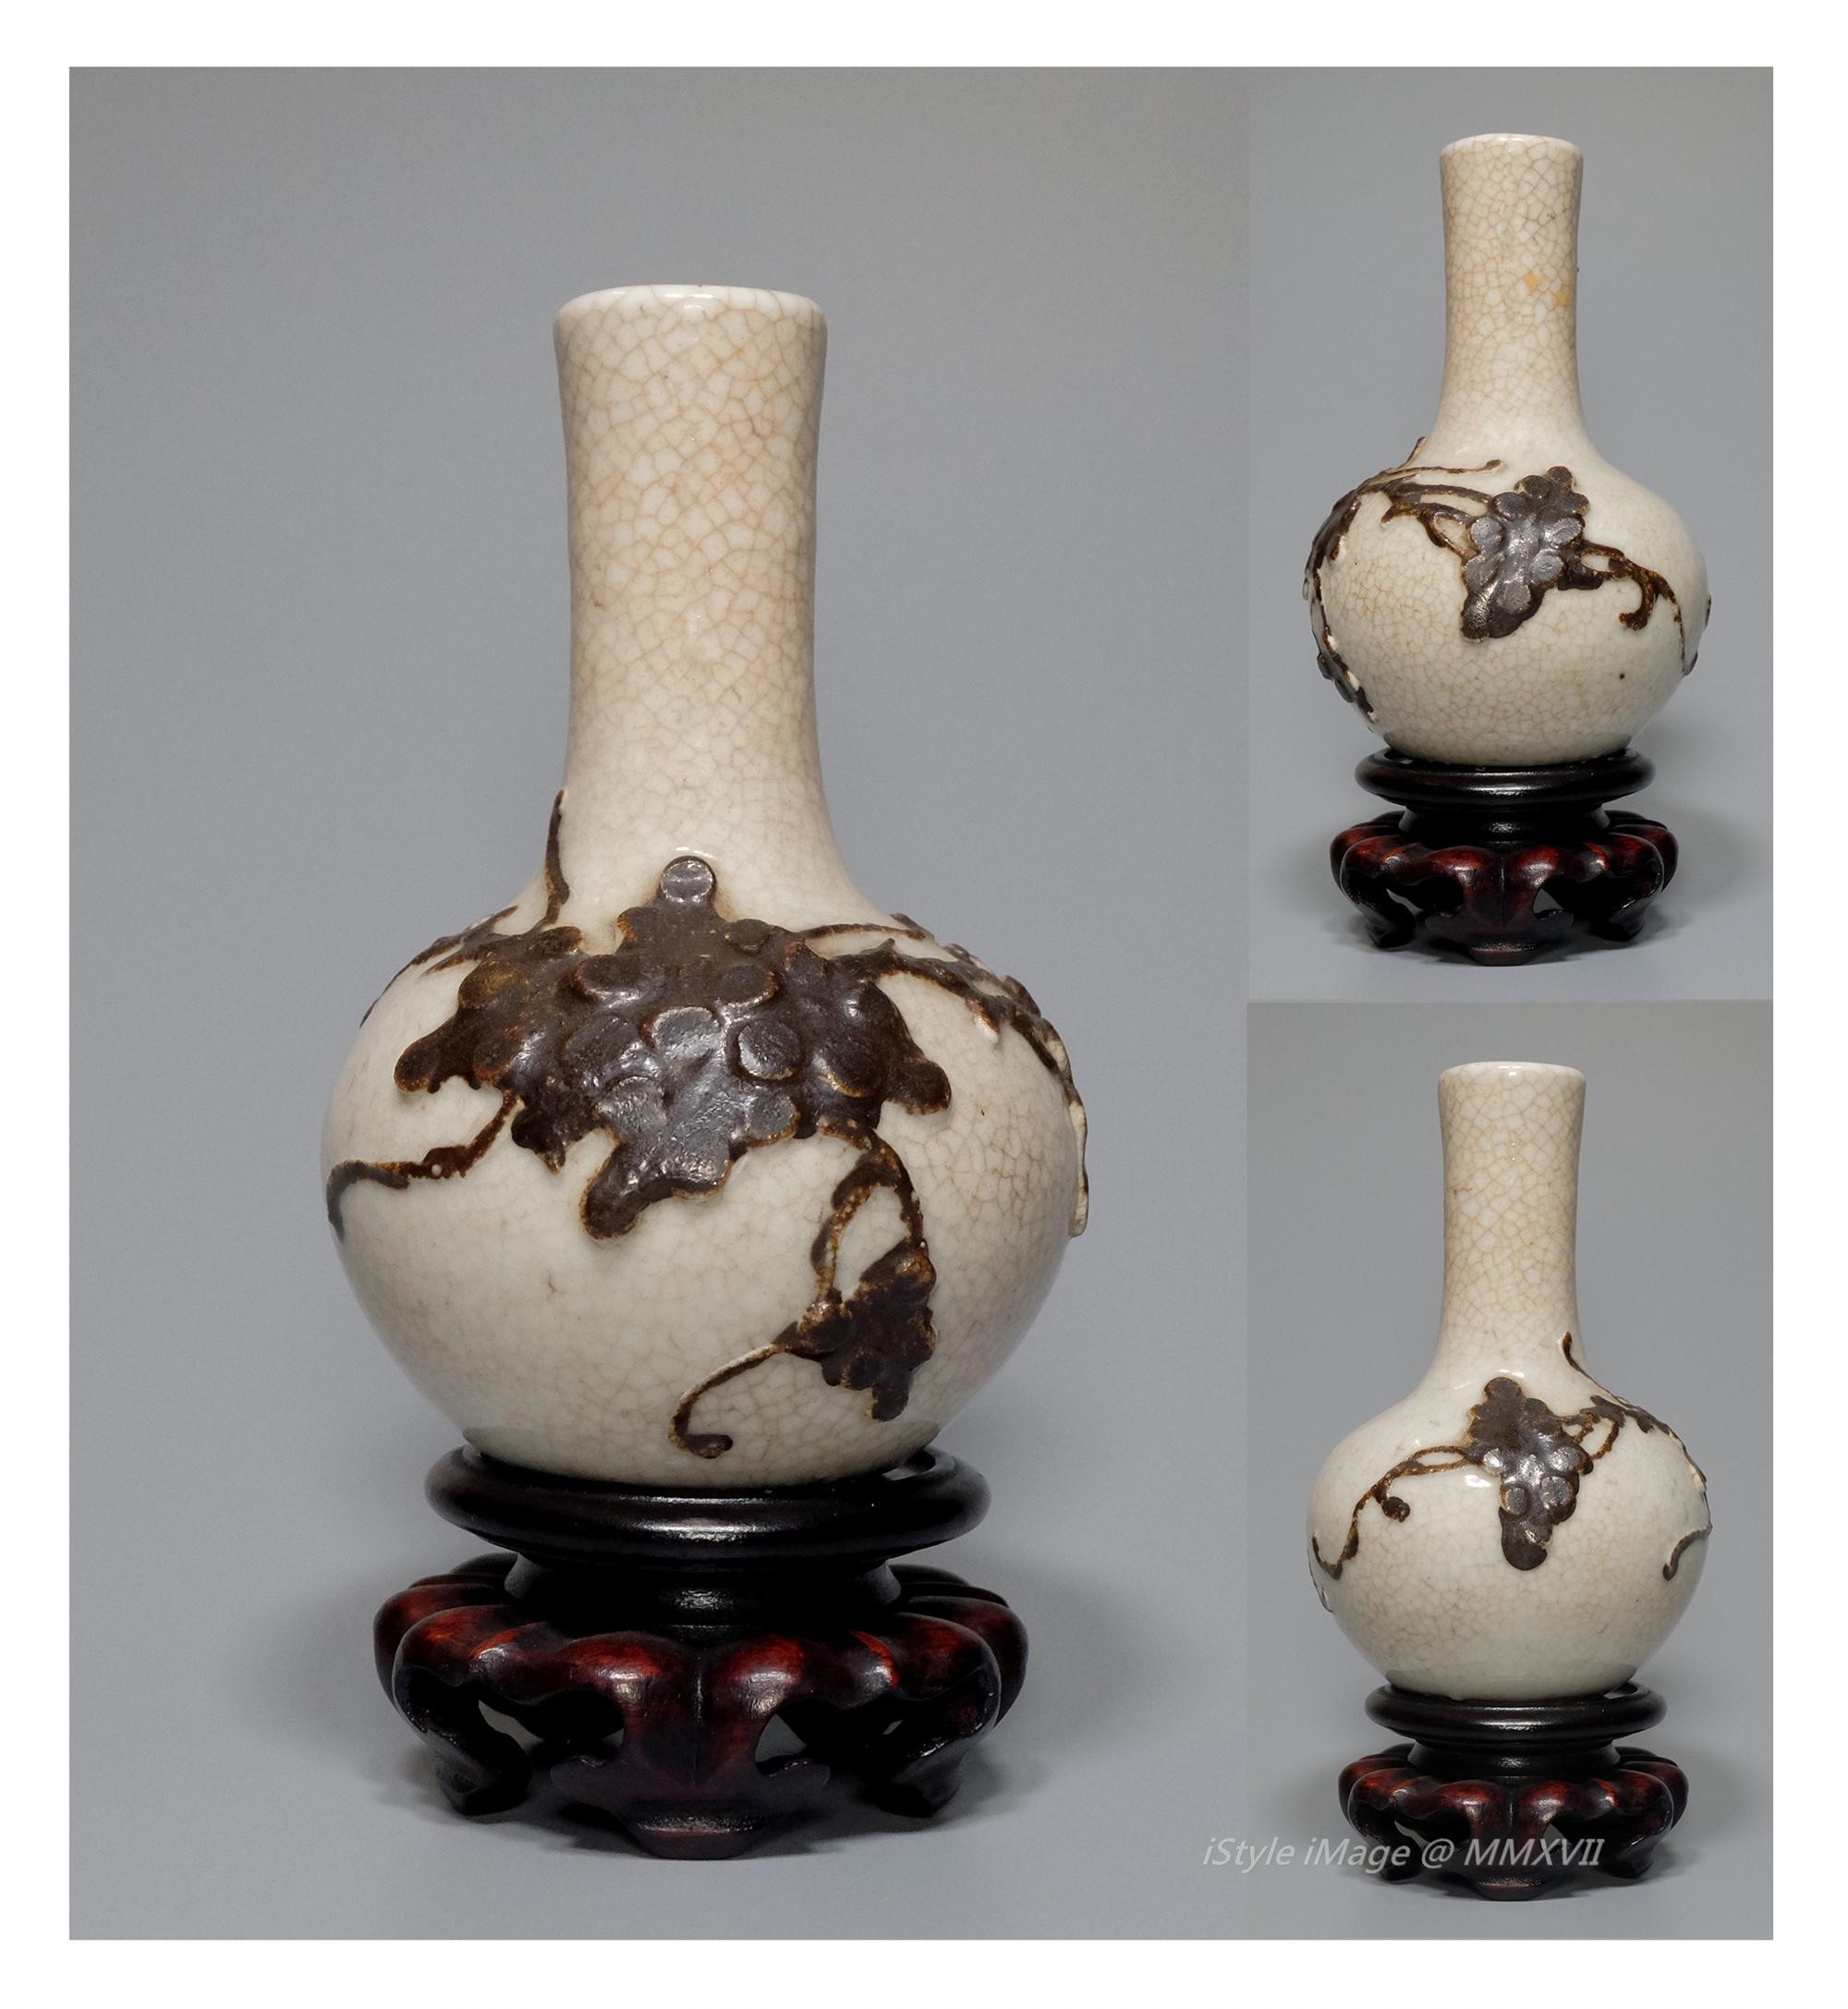 <br><h4>Lot 27 : An exceptional Yuan style vase  (40's last century )</h4>
					The pear shaped vase, rising from a short tapering foot to globular ribbed body then rising to a tall waisted cylinder neck, covered overall in an ivory glaze suffused with a network of crackle, contrasting with slip-decorated deep brown flowering branches on the exterior globular body. 
					<br>Measurements (H) high 10 CM, (W)width 6.5 CM<br><br><br>罕有的元代風格花瓶  ( 上世紀四十年代 )<br>梨形花瓶，從一個短錐形的腳上升到球體瓶身，然後升起到一個高腰的圓柱頸部，整體覆蓋著象牙色的壁裂釉，深棕色開花枝裝飾在球體外部。<br>尺寸(H)高 10 厘米,  (W)濶6.5 厘米 